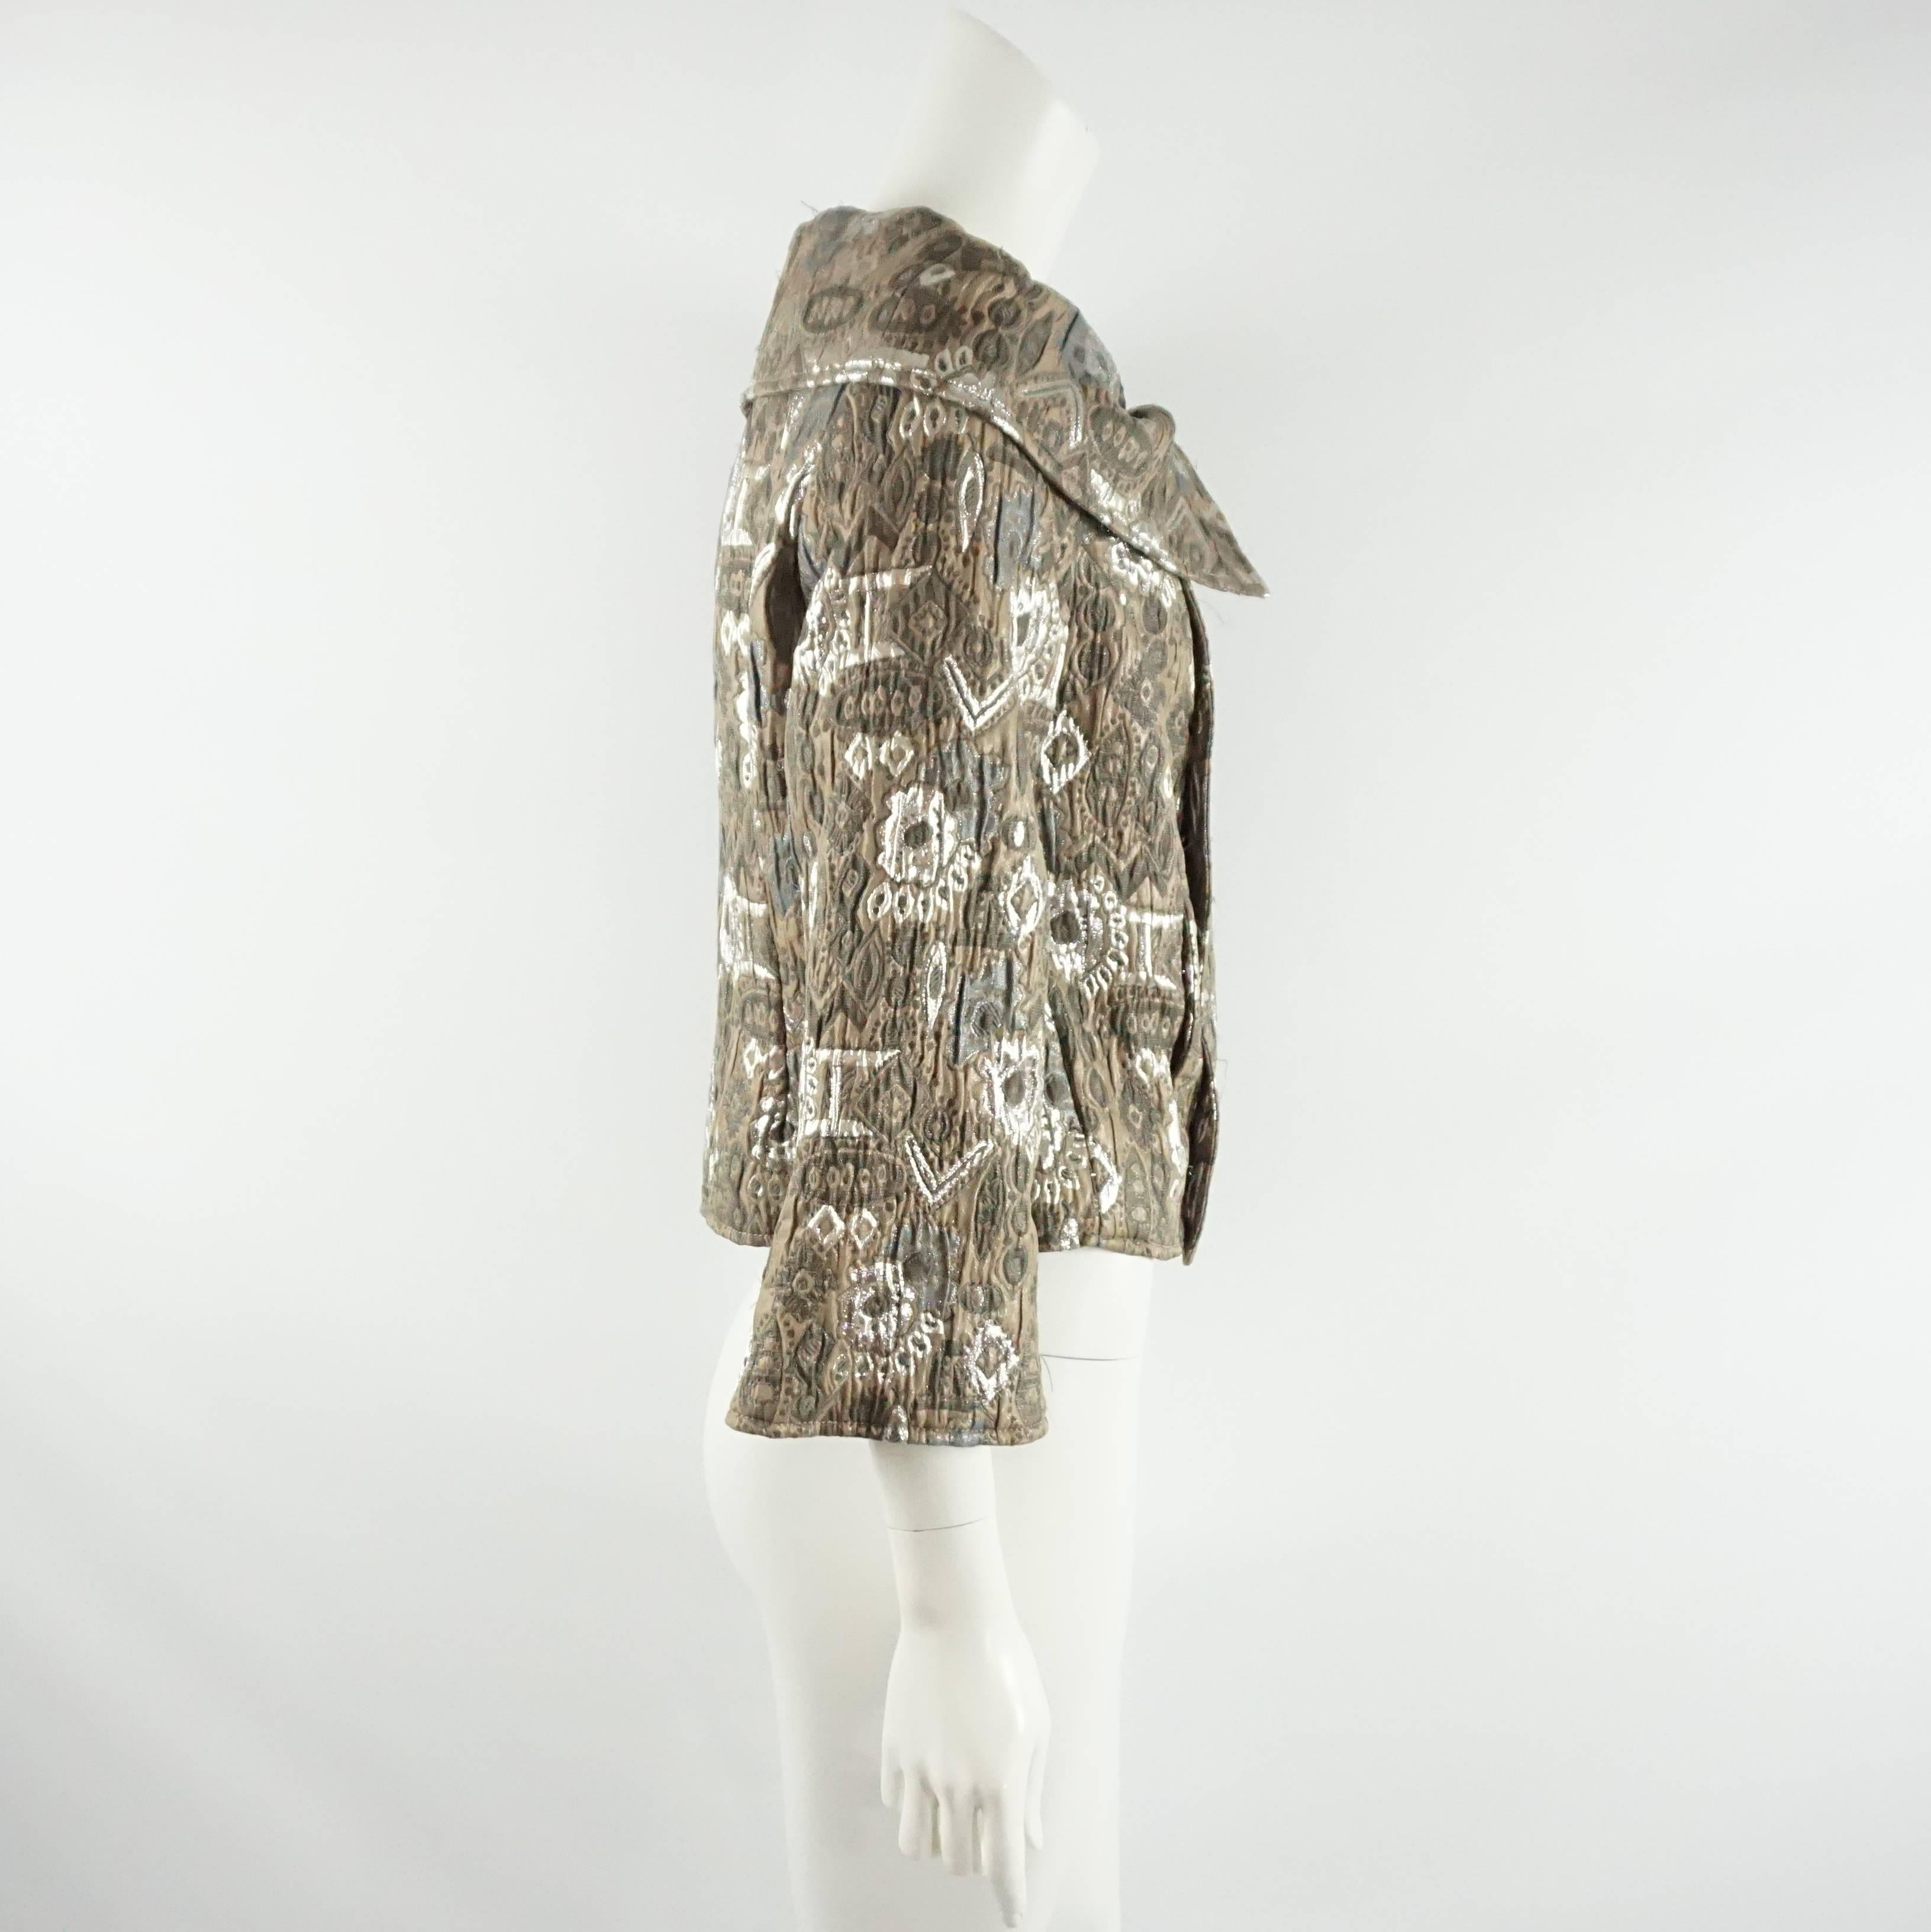 This stunning Oscar de la Renta taupe jacket is made of a polyester-silk blend brocade fabric that has silver metallic in it. The jacket is double breasted and has a slouchy portrait collar, a swing look, and 2 front pockets. It is in good condition